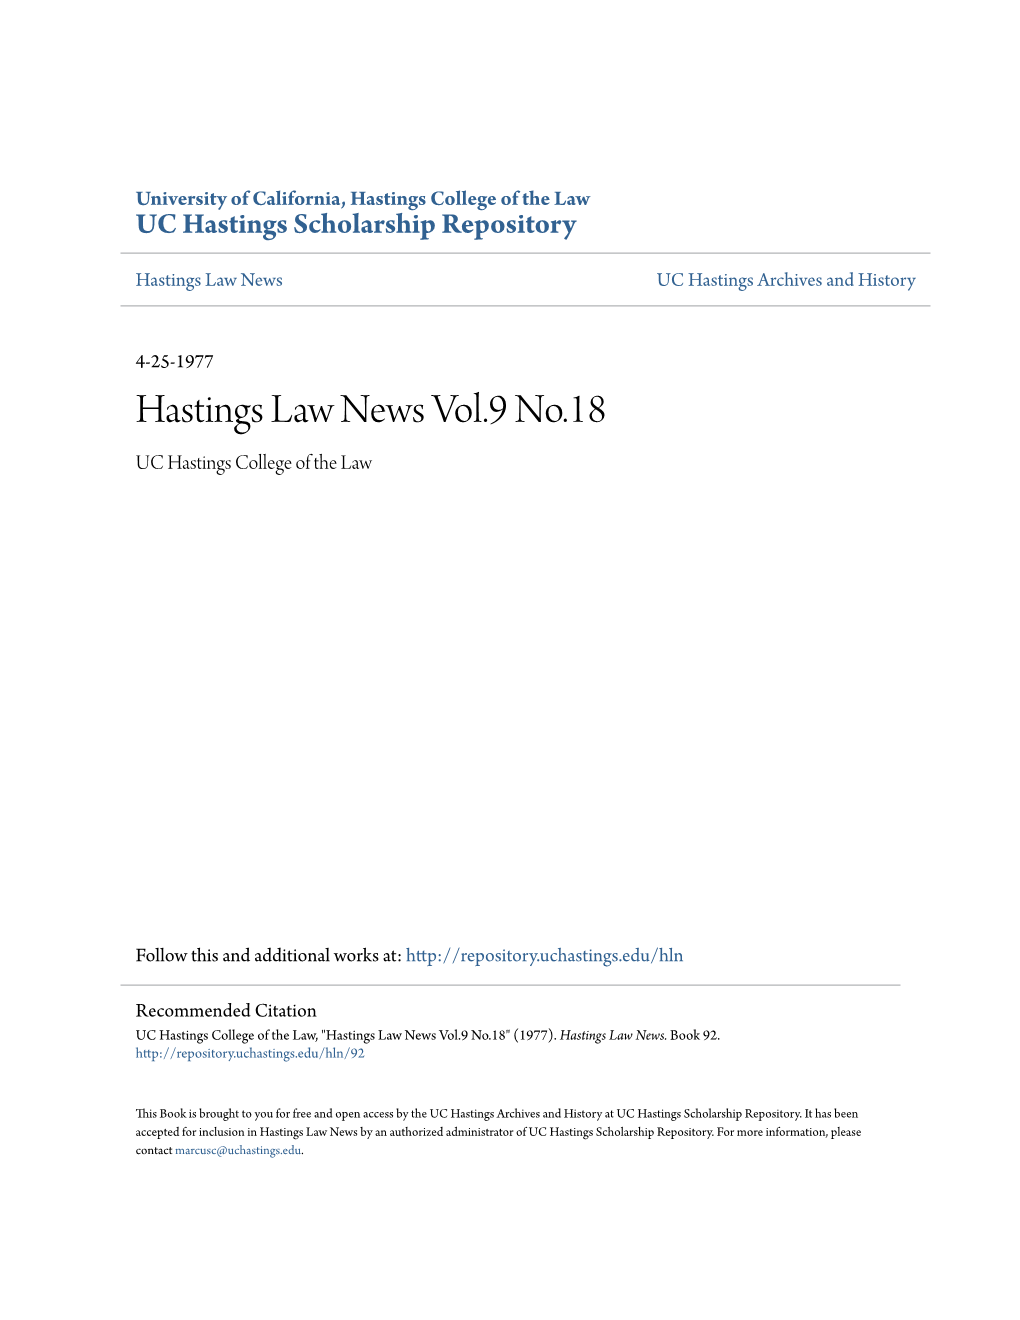 Hastings Law News Vol.9 No.18 UC Hastings College of the Law